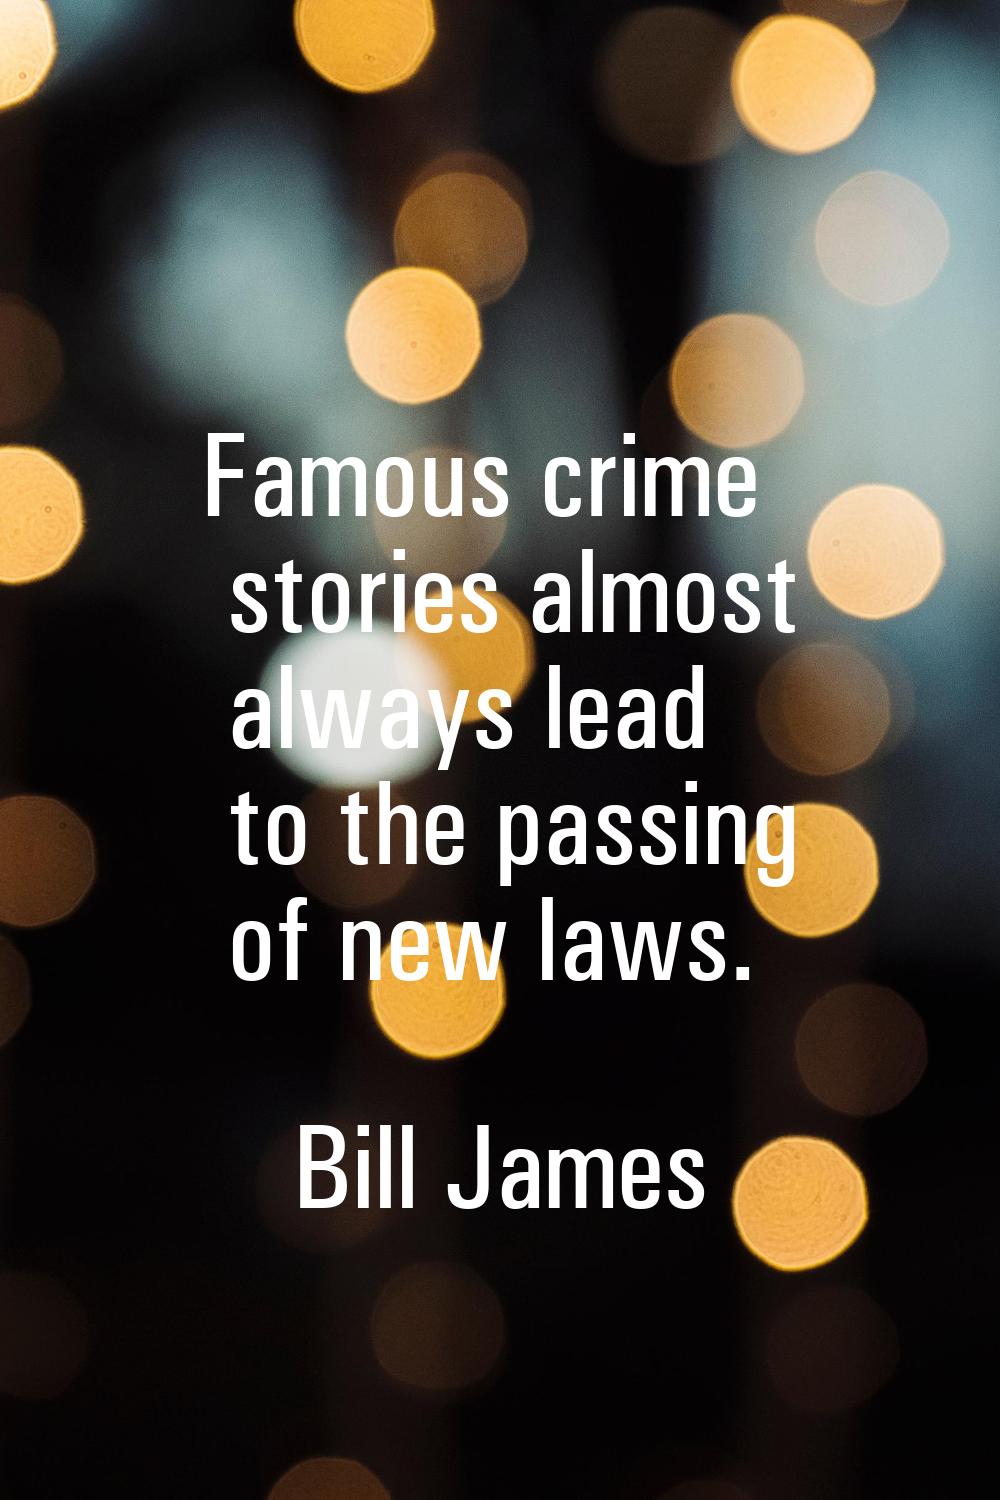 Famous crime stories almost always lead to the passing of new laws.